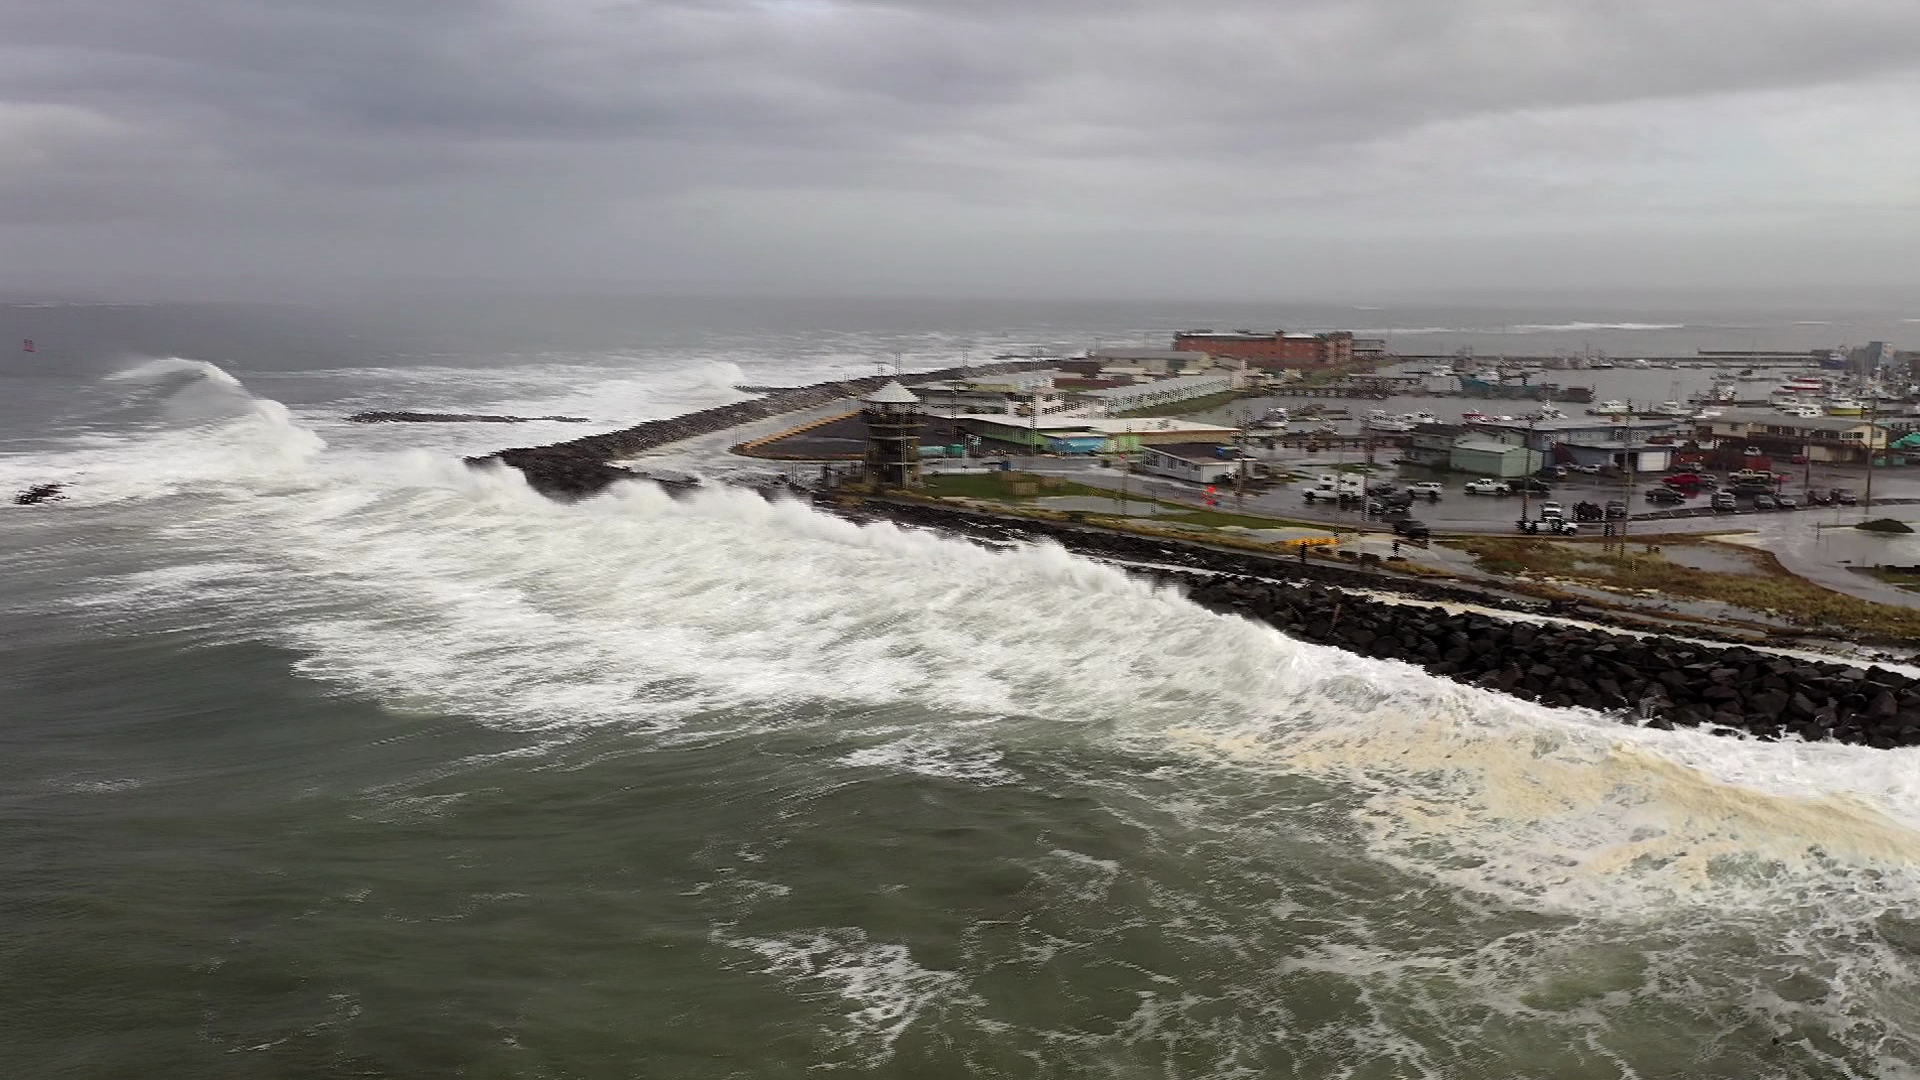 Safe viewing advice from the Westport man who shot viral video of last November's king tides